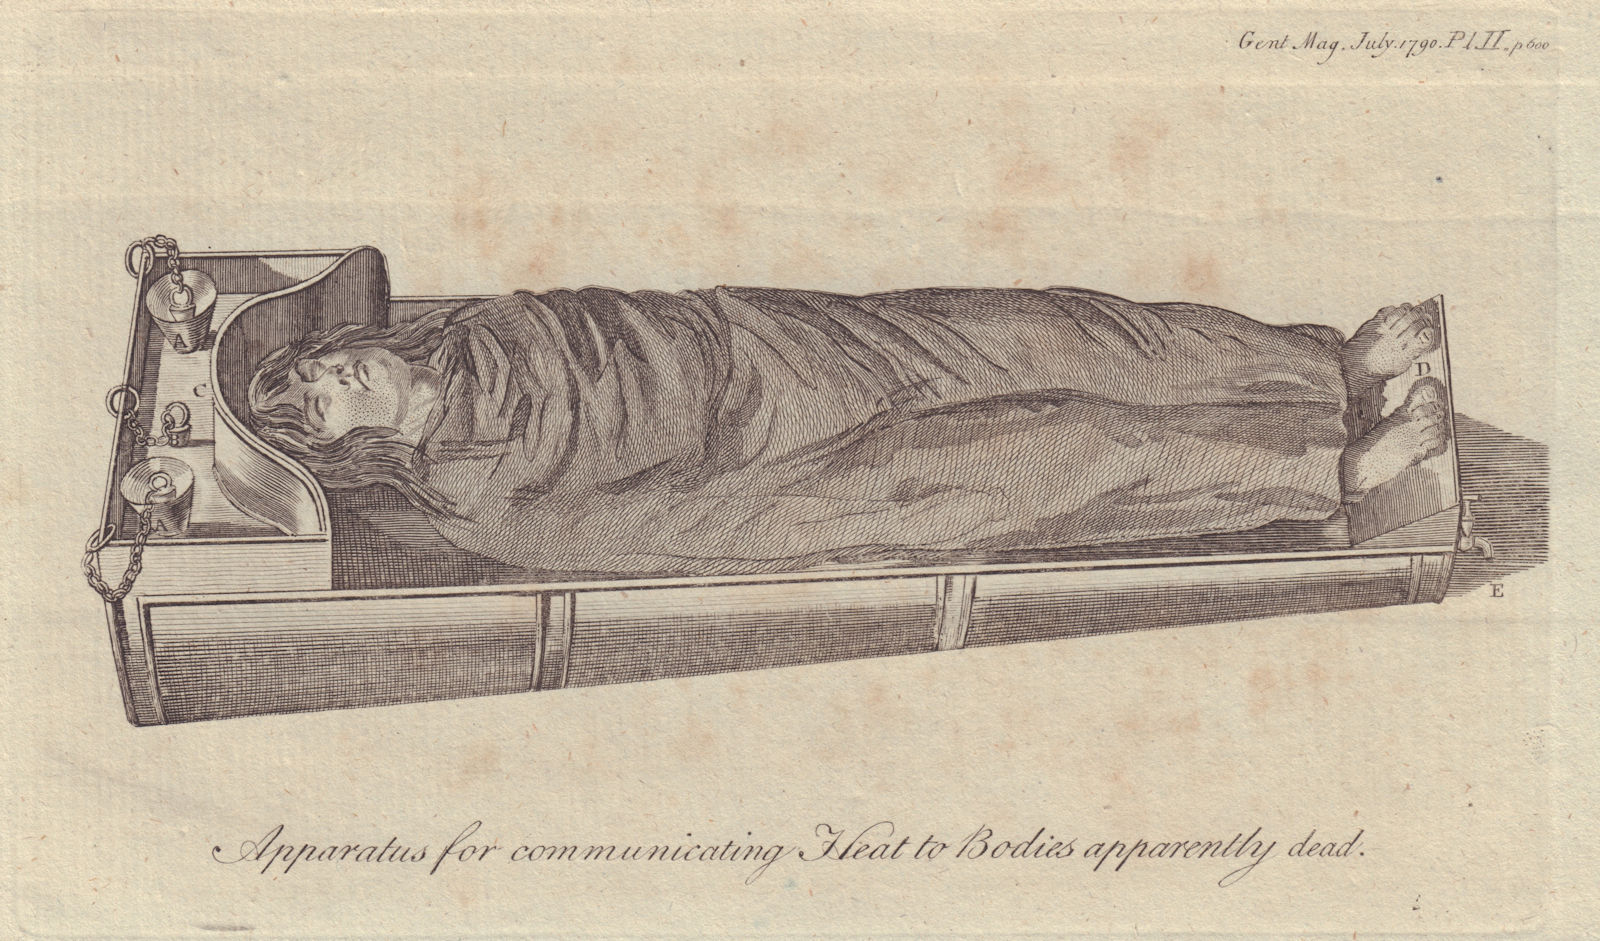 Hervey's Apparatus for communicating Heat to Bodies apparently dead 1790 print